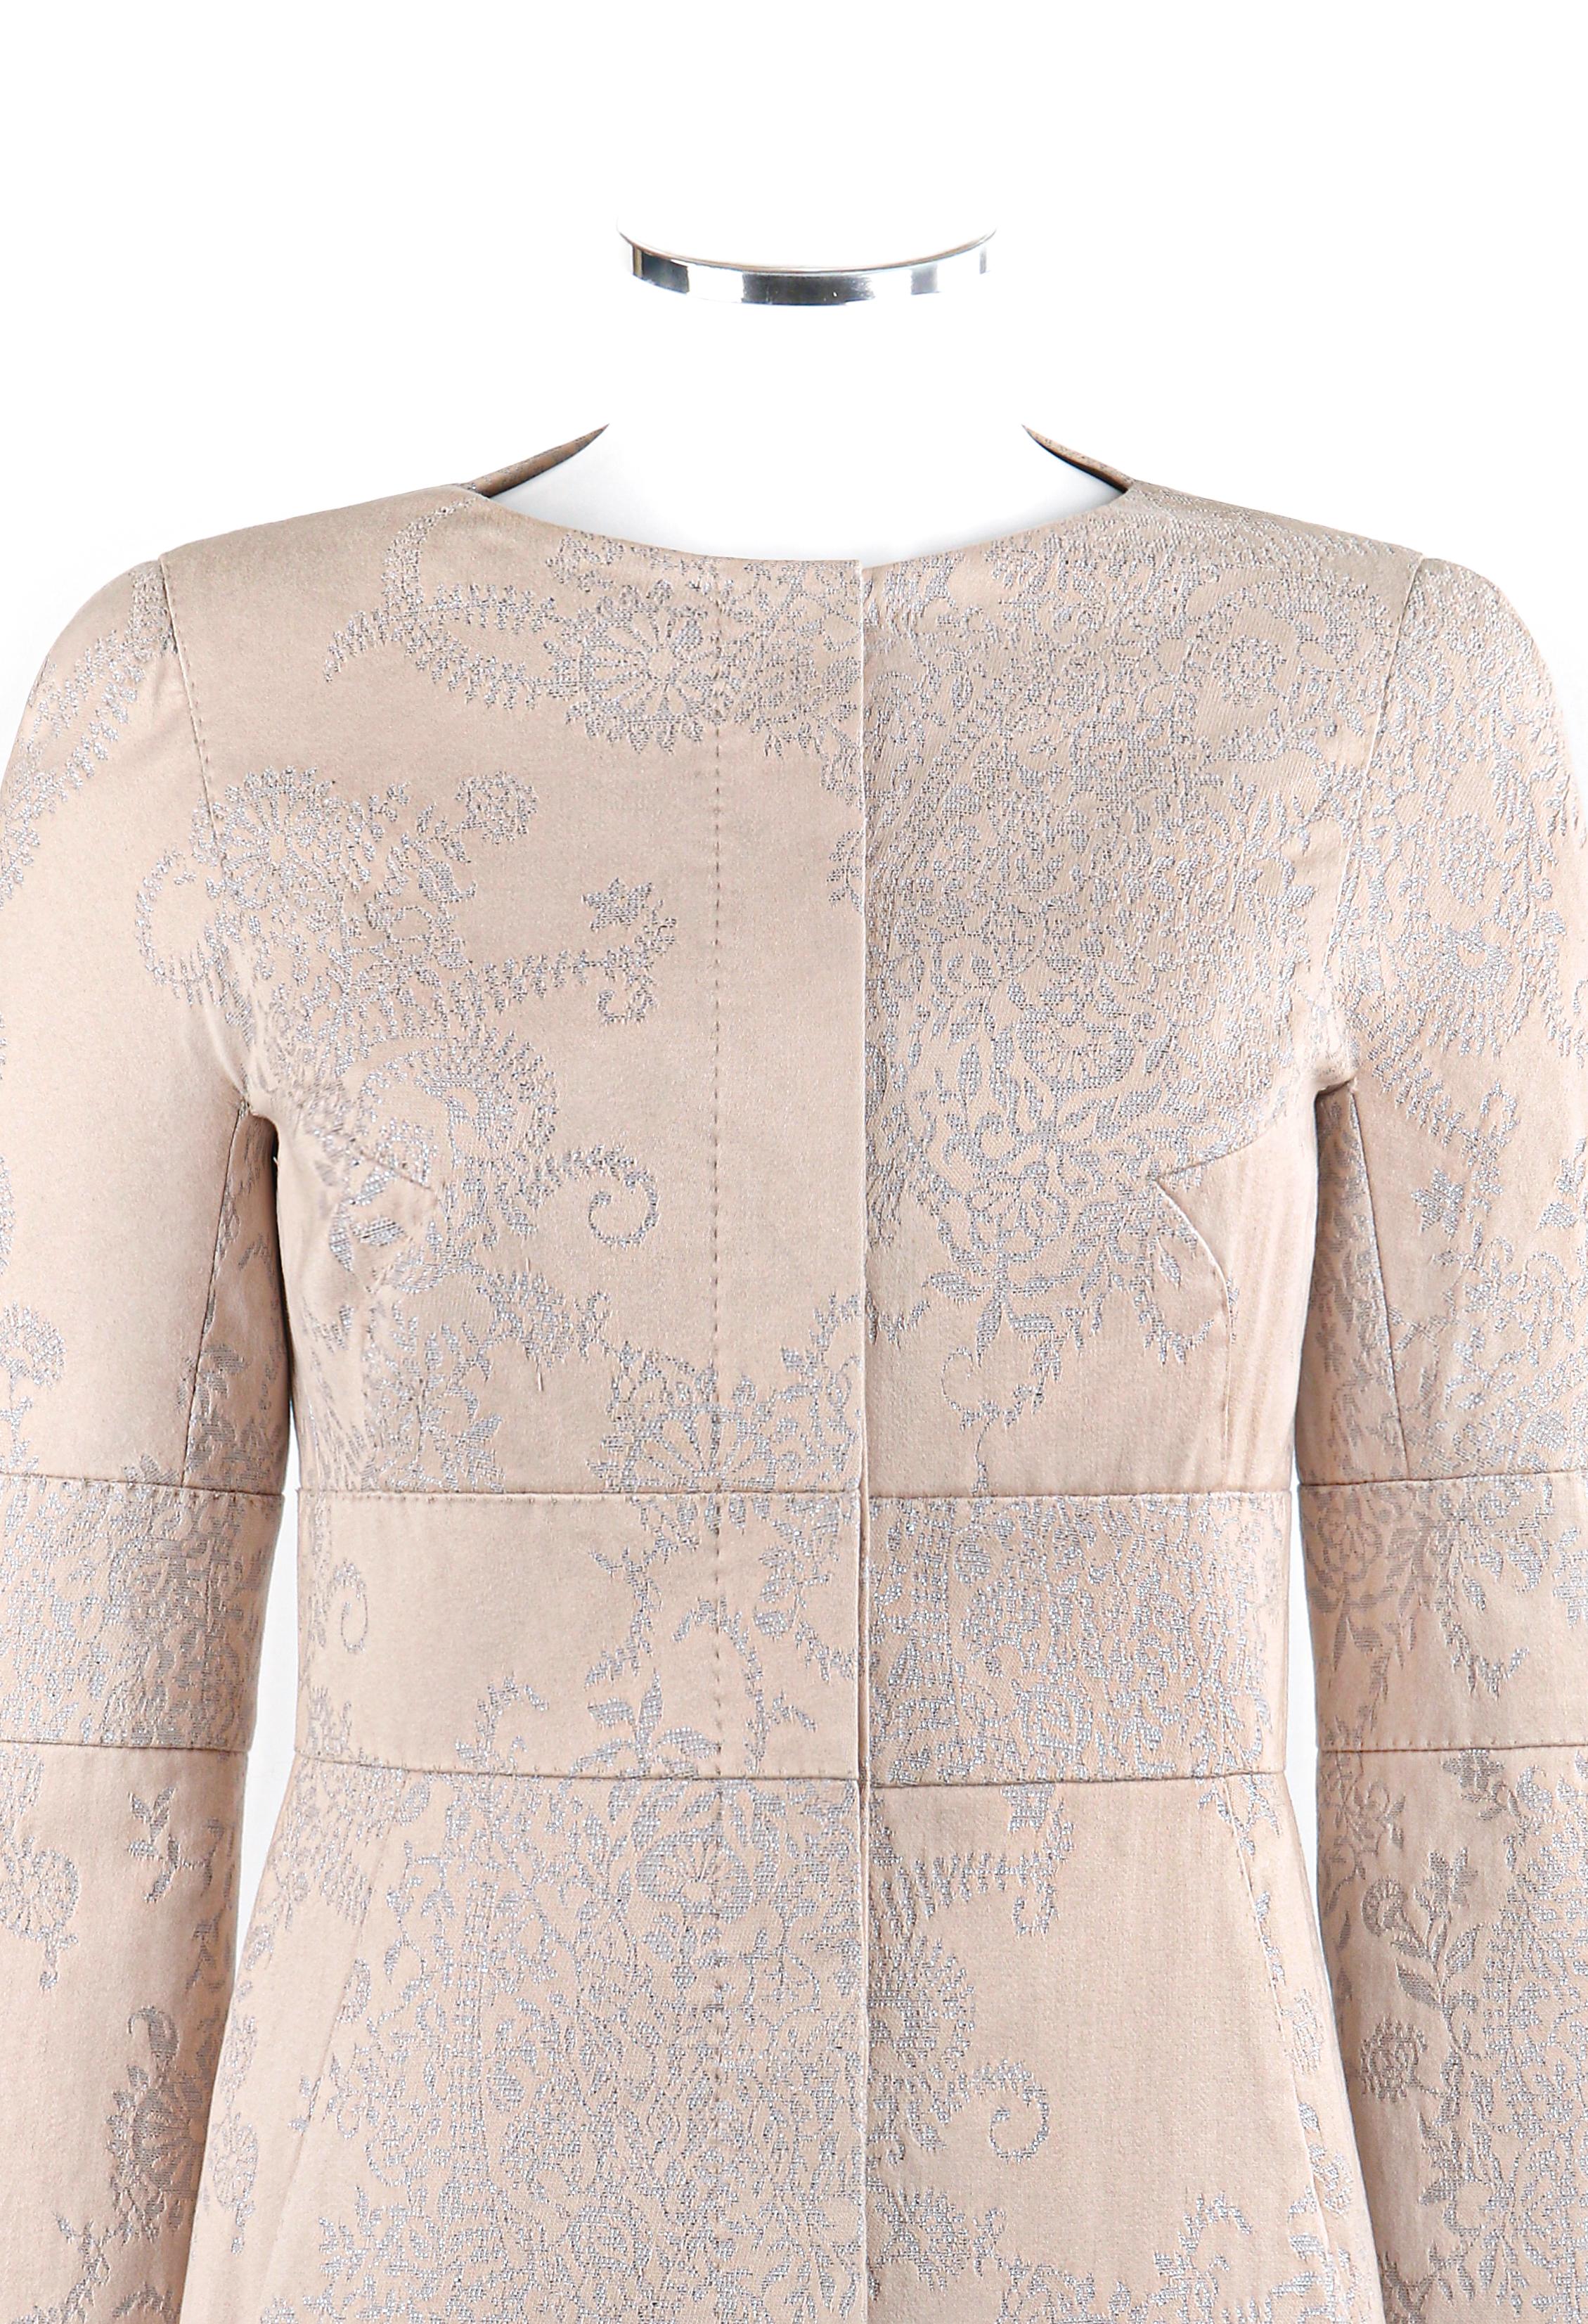 ALEXANDER McQUEEN A/W 2004 “Pantheom as Lecum” Pink Metallic Embroidered Coat In Good Condition For Sale In Thiensville, WI